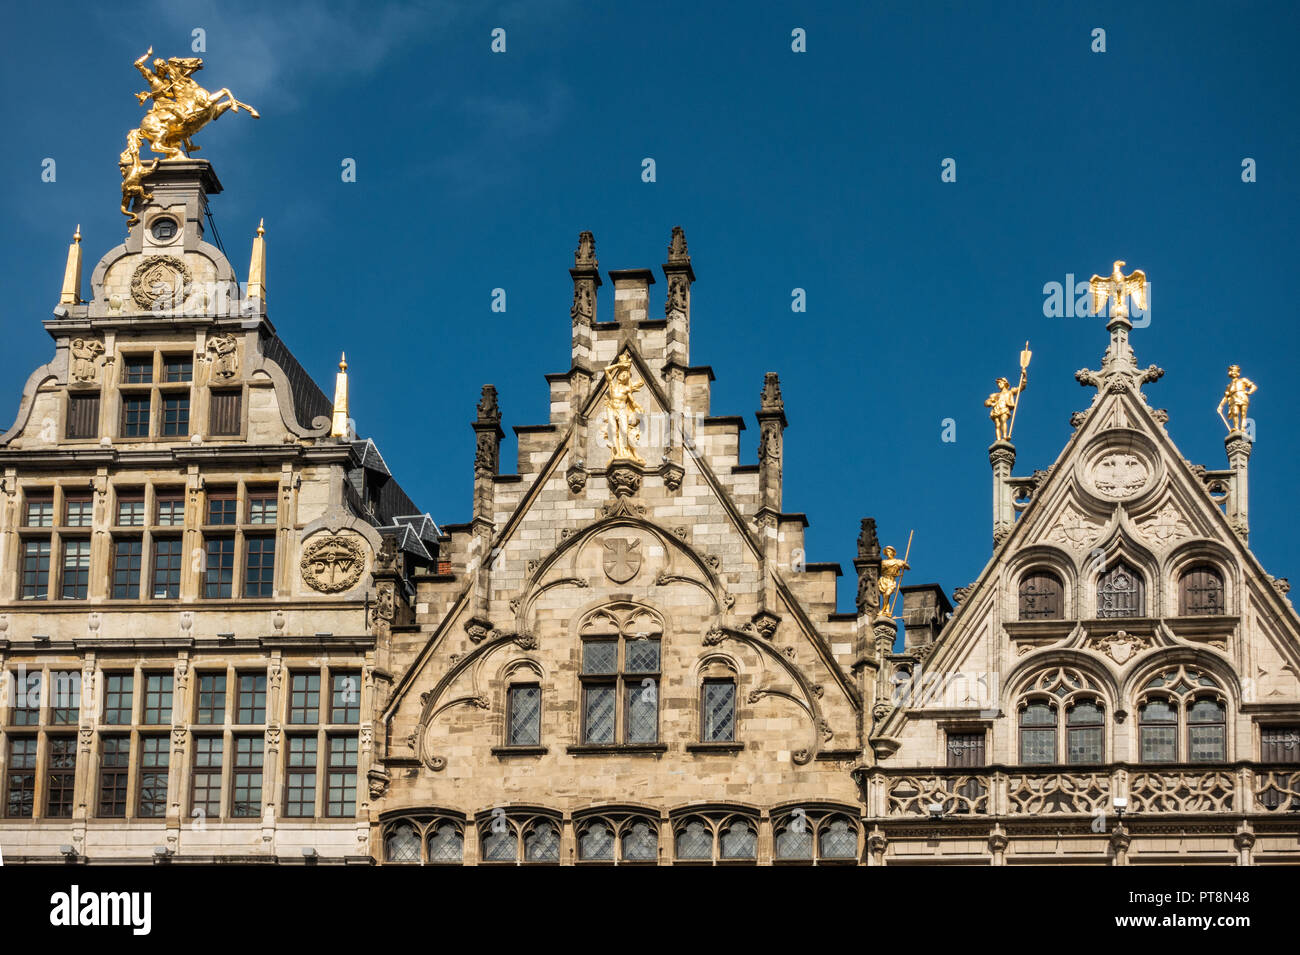 Antwerp, Belgium - September 24, 2018: Golden statues on top of the facades of guild houses on Grote Markt. Brown stones, arches under blue sky. Stock Photo